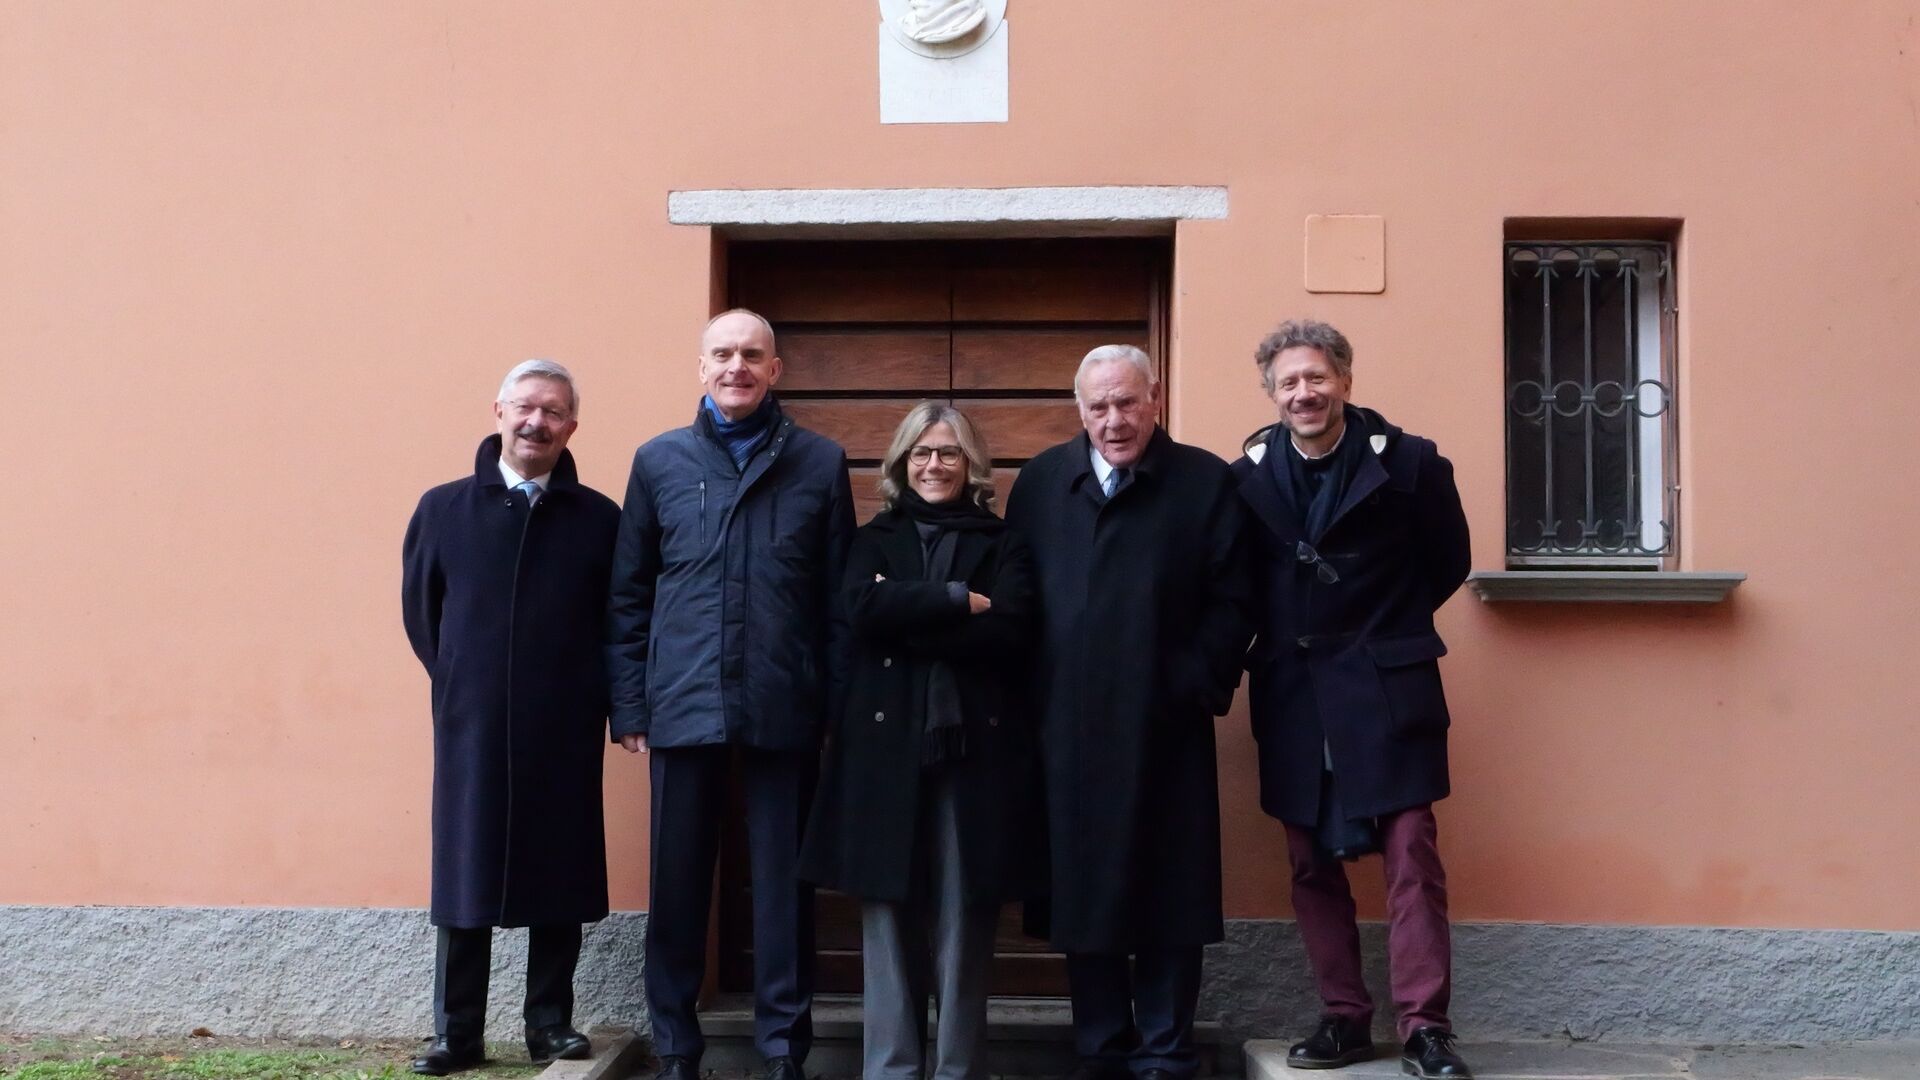 Human and natural sciences: Antonio Melli, Vice-President of the IBSA Group, Roberto Badaracco, Municipal of Lugano, Silvia Misiti, Director of the IBSA Foundation for Scientific Research, Arturo Licenziati, President and CEO of the IBSA Group, and Luigi Di Corato, Director of the Division Culture of the City of Lugano, in front of the entrance to Casa Carlo Cattaneo on Christmas Eve 2022 (Photo: City of Lugano)